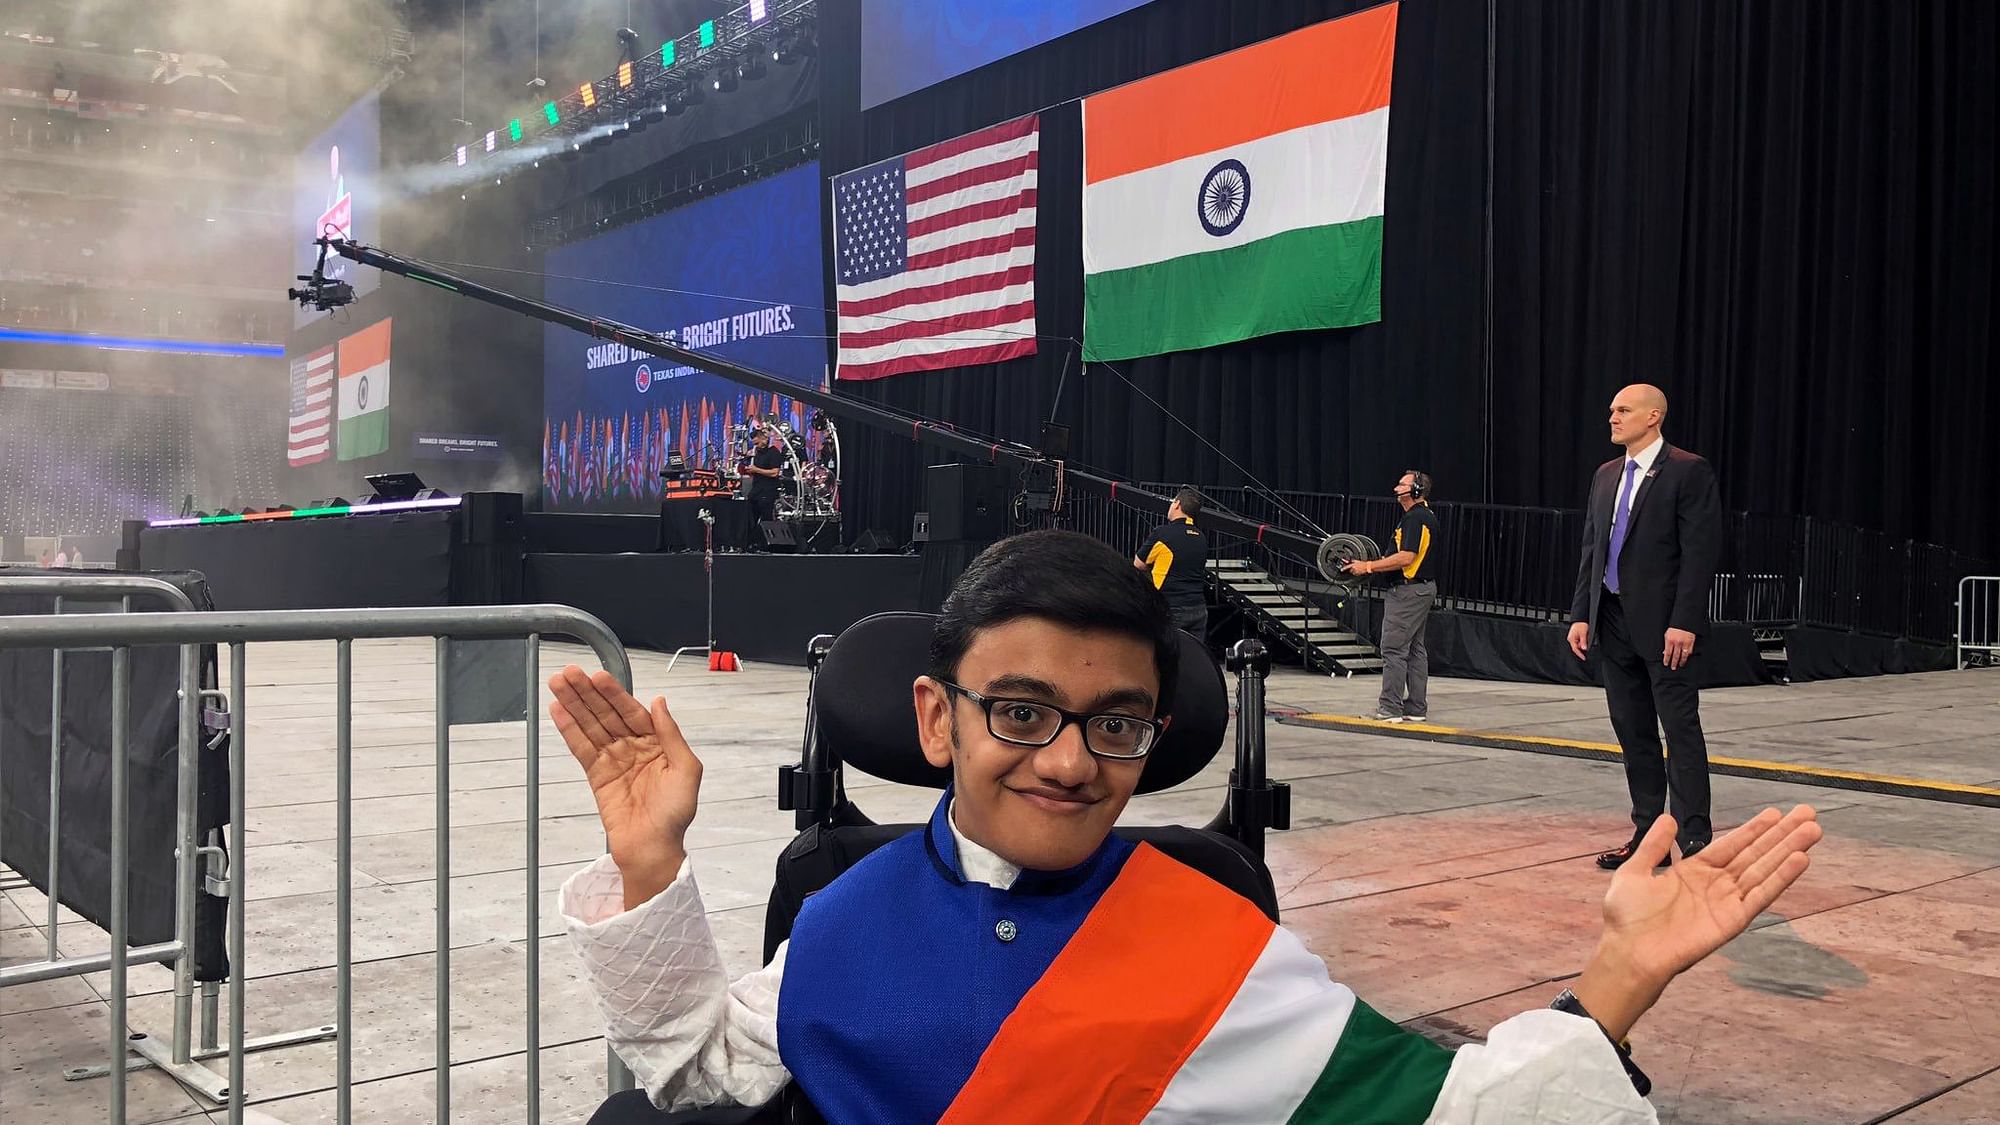 Specially-abled Indian-origin teenager Sparsh Shah opened the event, ‘Howdy Modi’ by singing India’s national anthem, ‘Jana Gana Mana’.&nbsp;